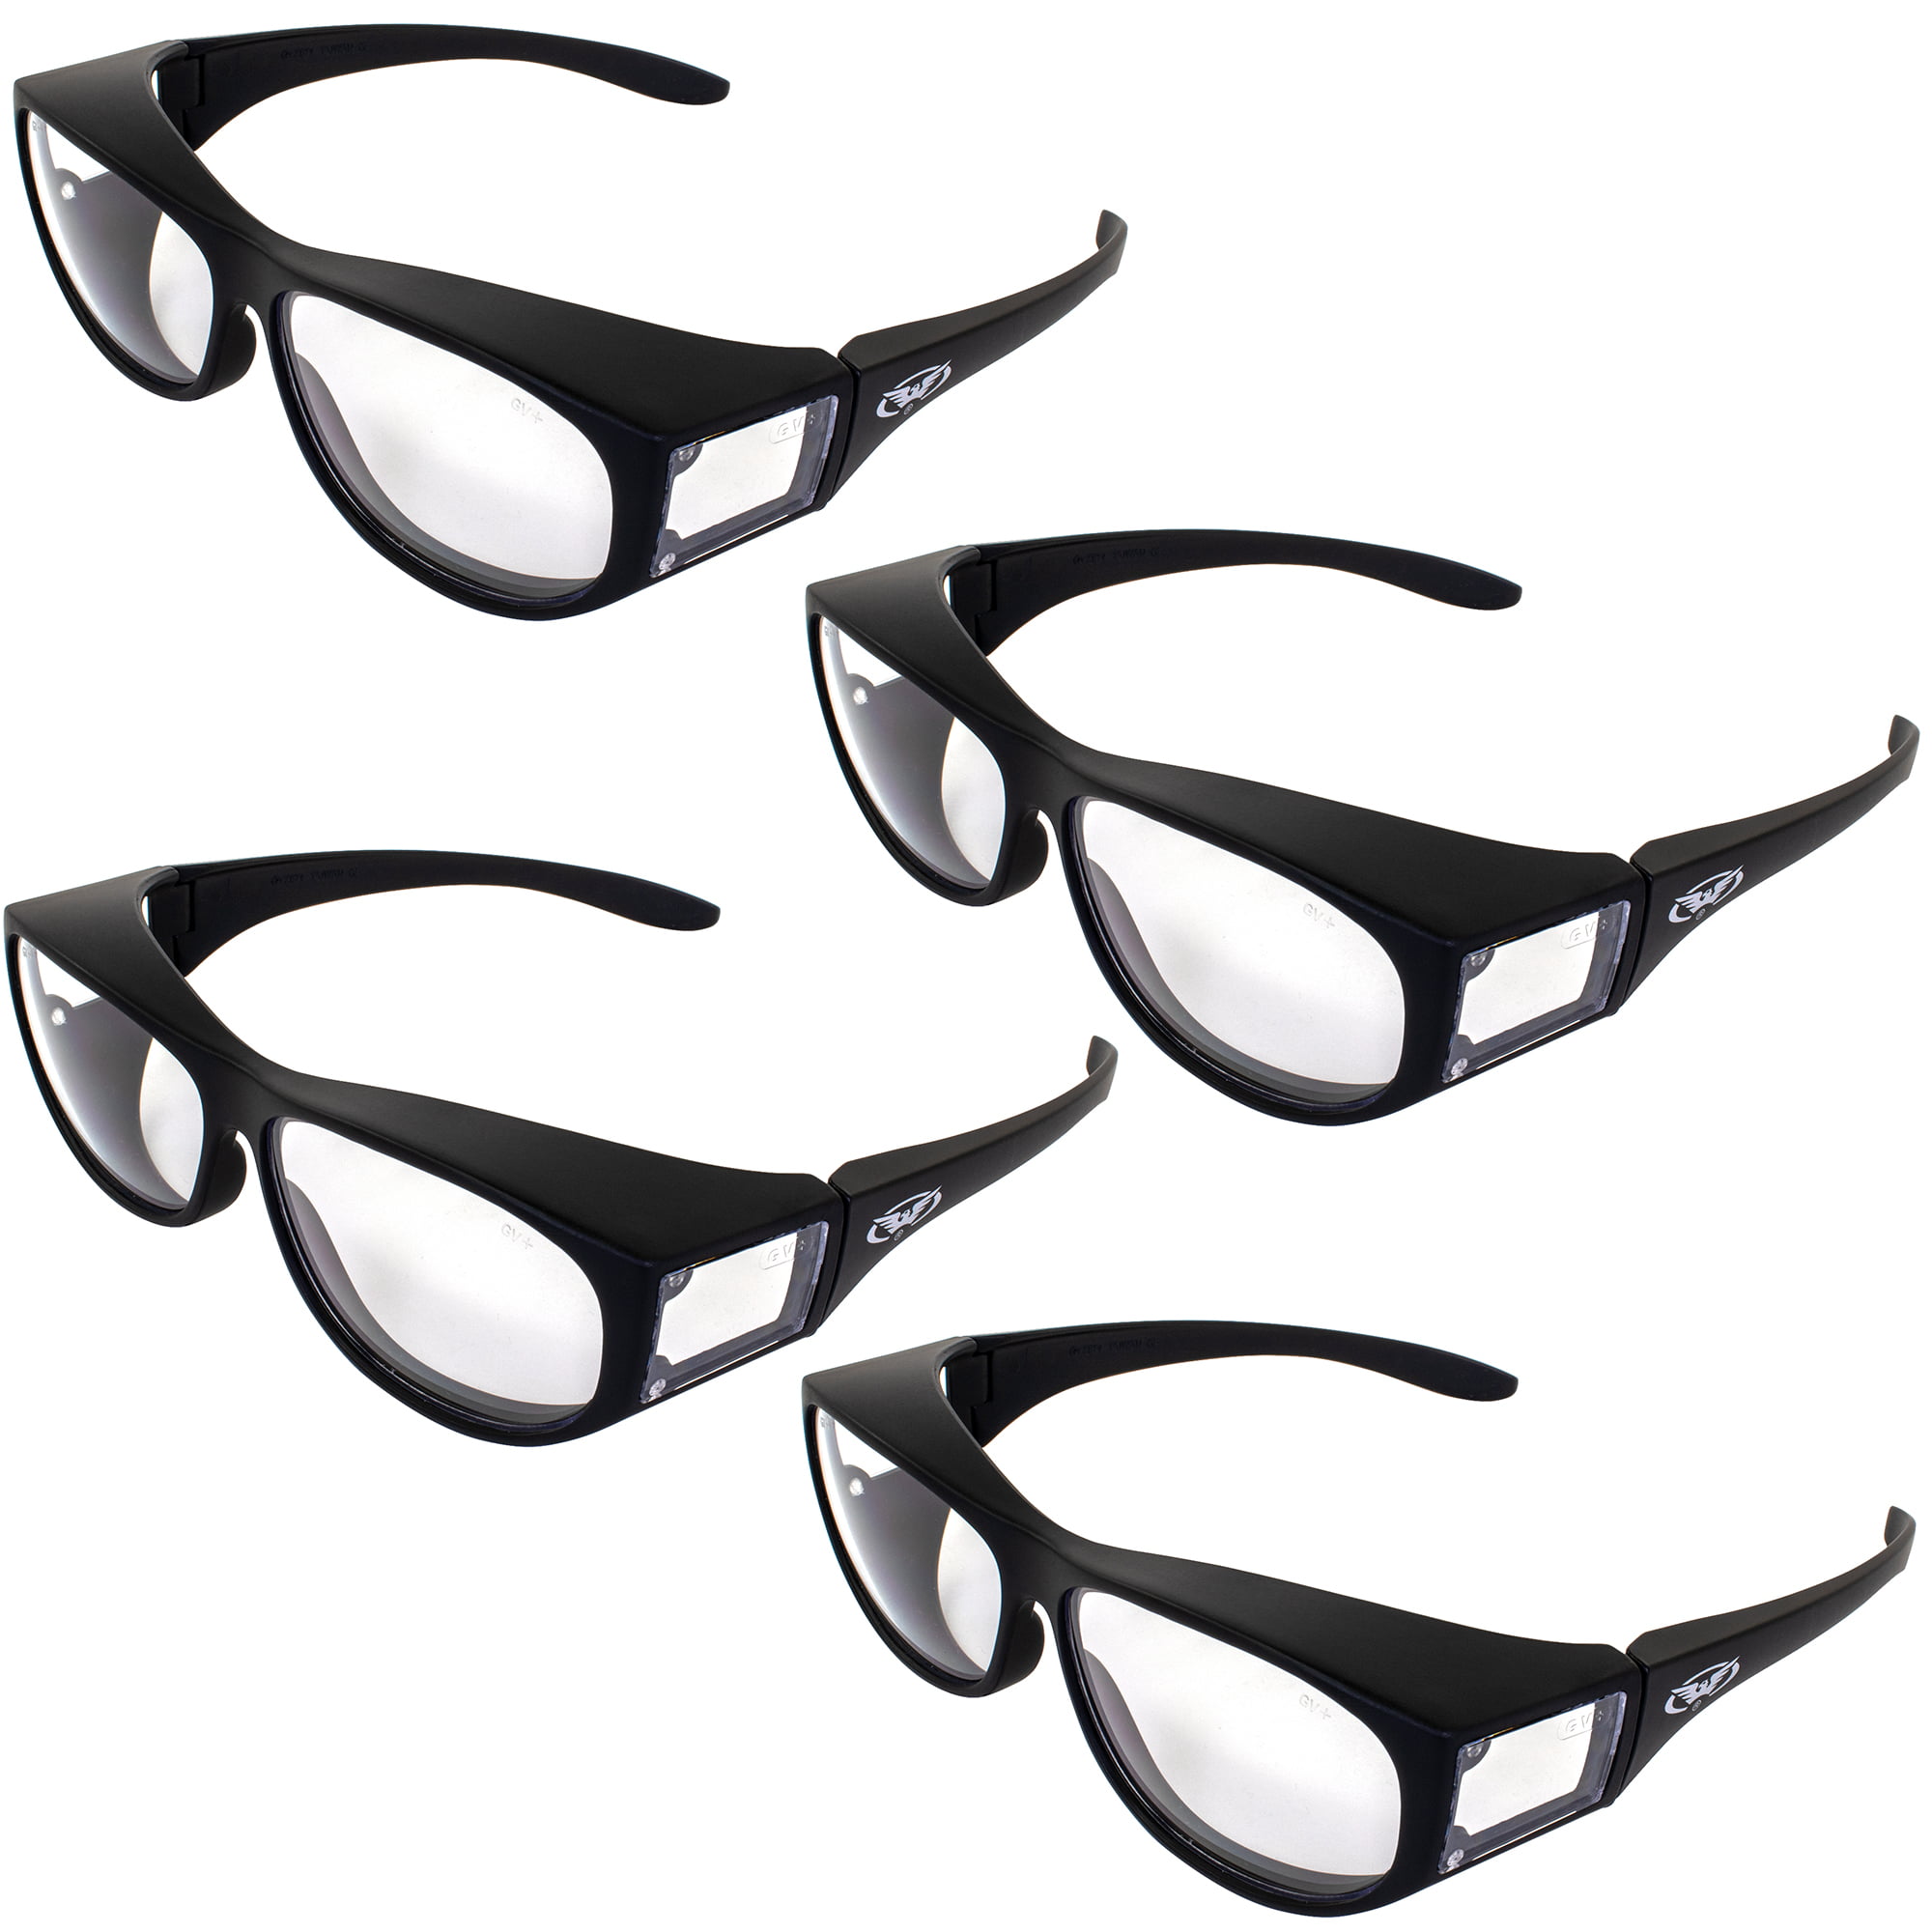 SAS Safety 5420-15 LED Inspectors Readers 1.5x Safety Glasses 